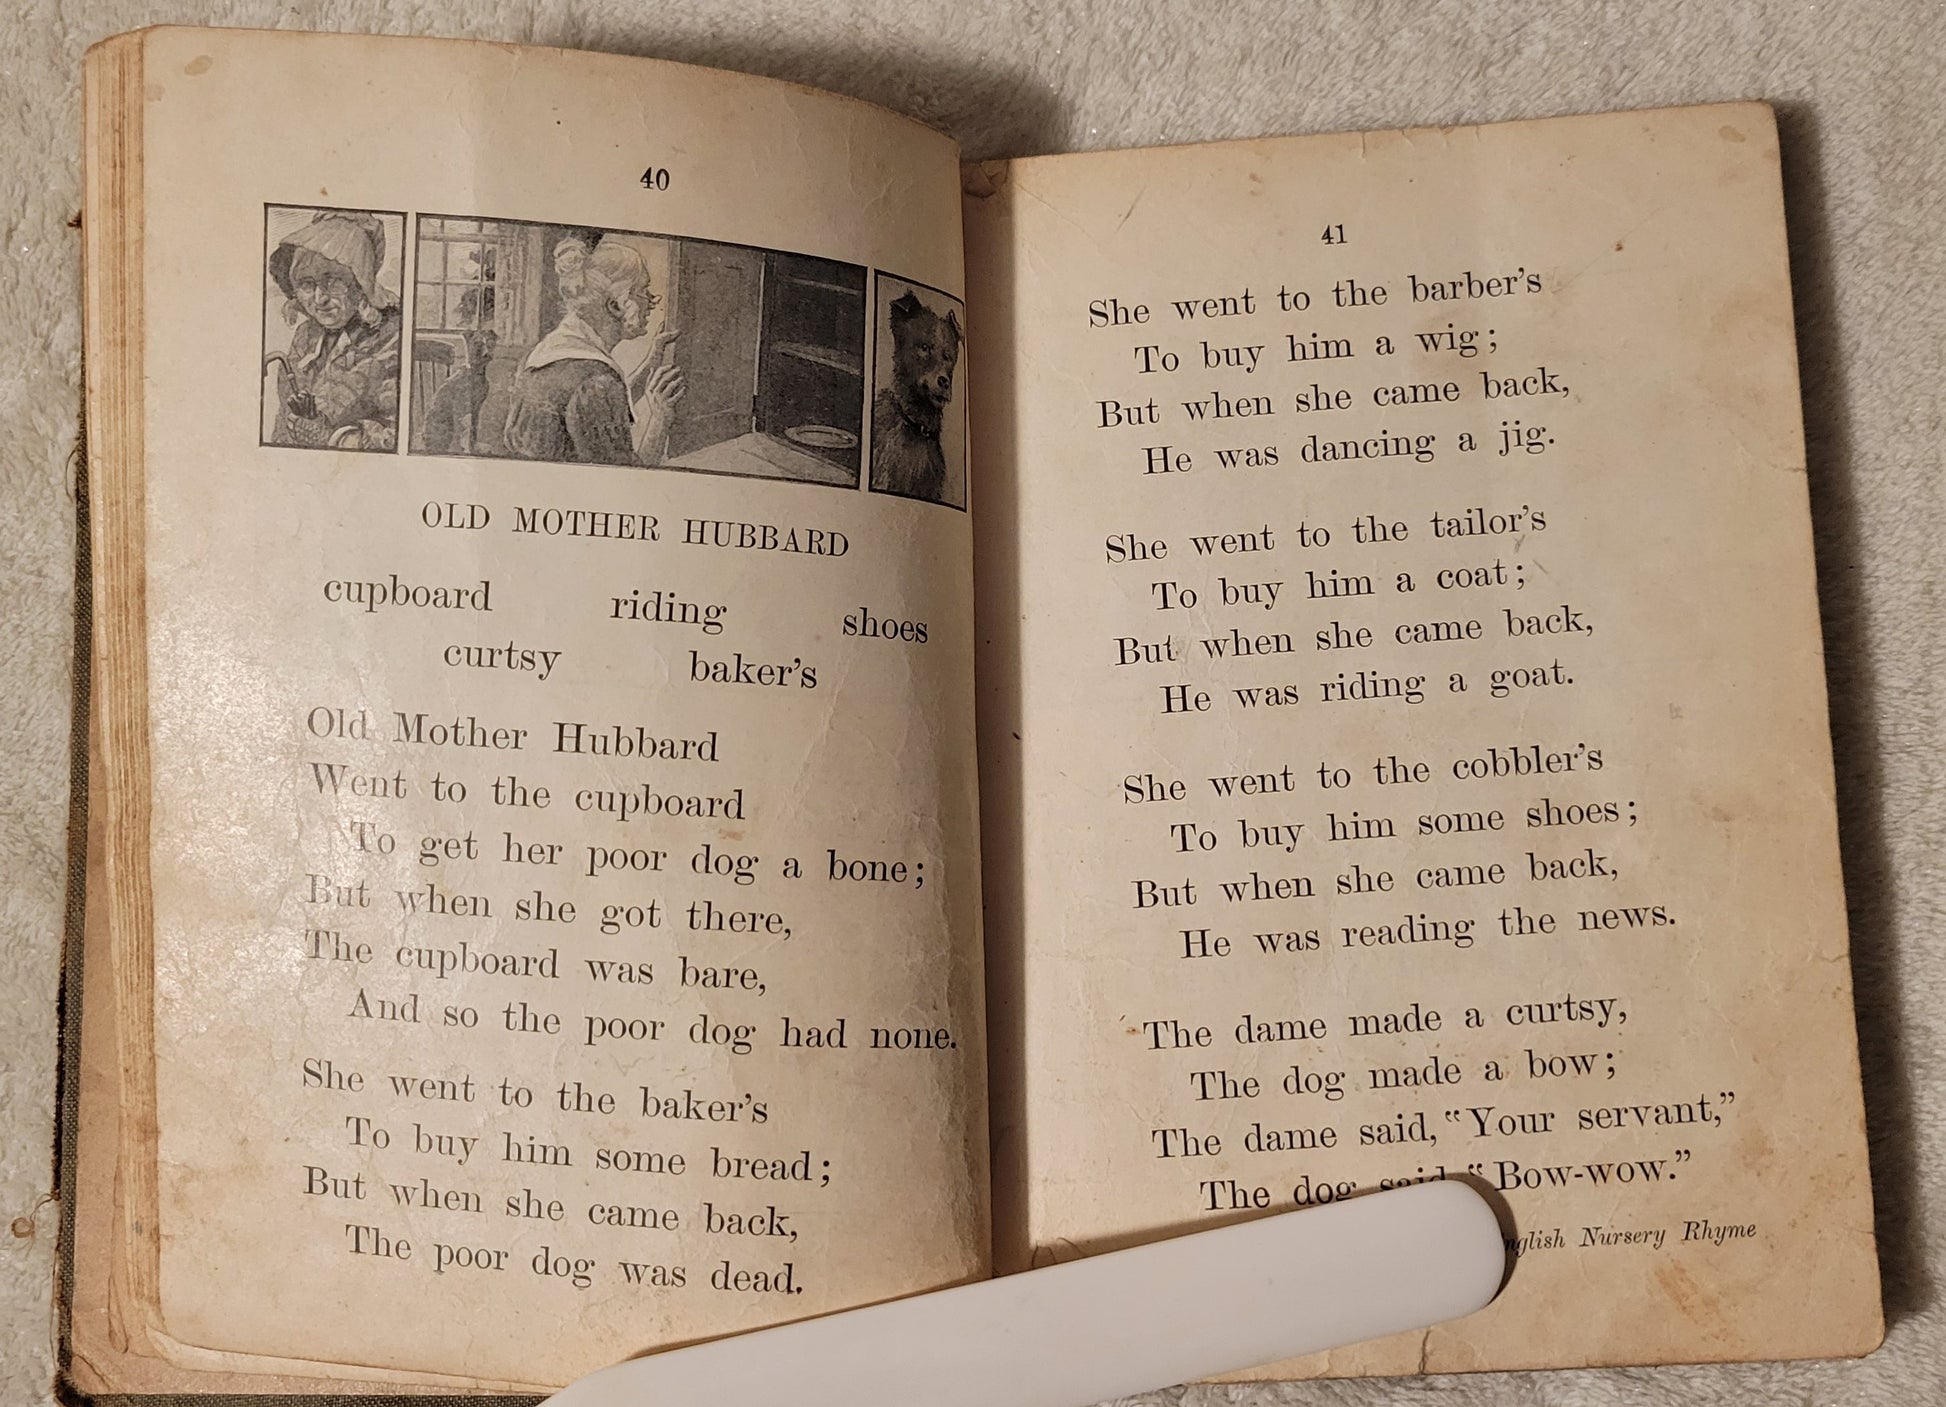 Antique book for sale "The Beacon First Reader" by James H. Fassett, Ginn and Company, 1913.  A child's schoolbook. Pages 40 and 41